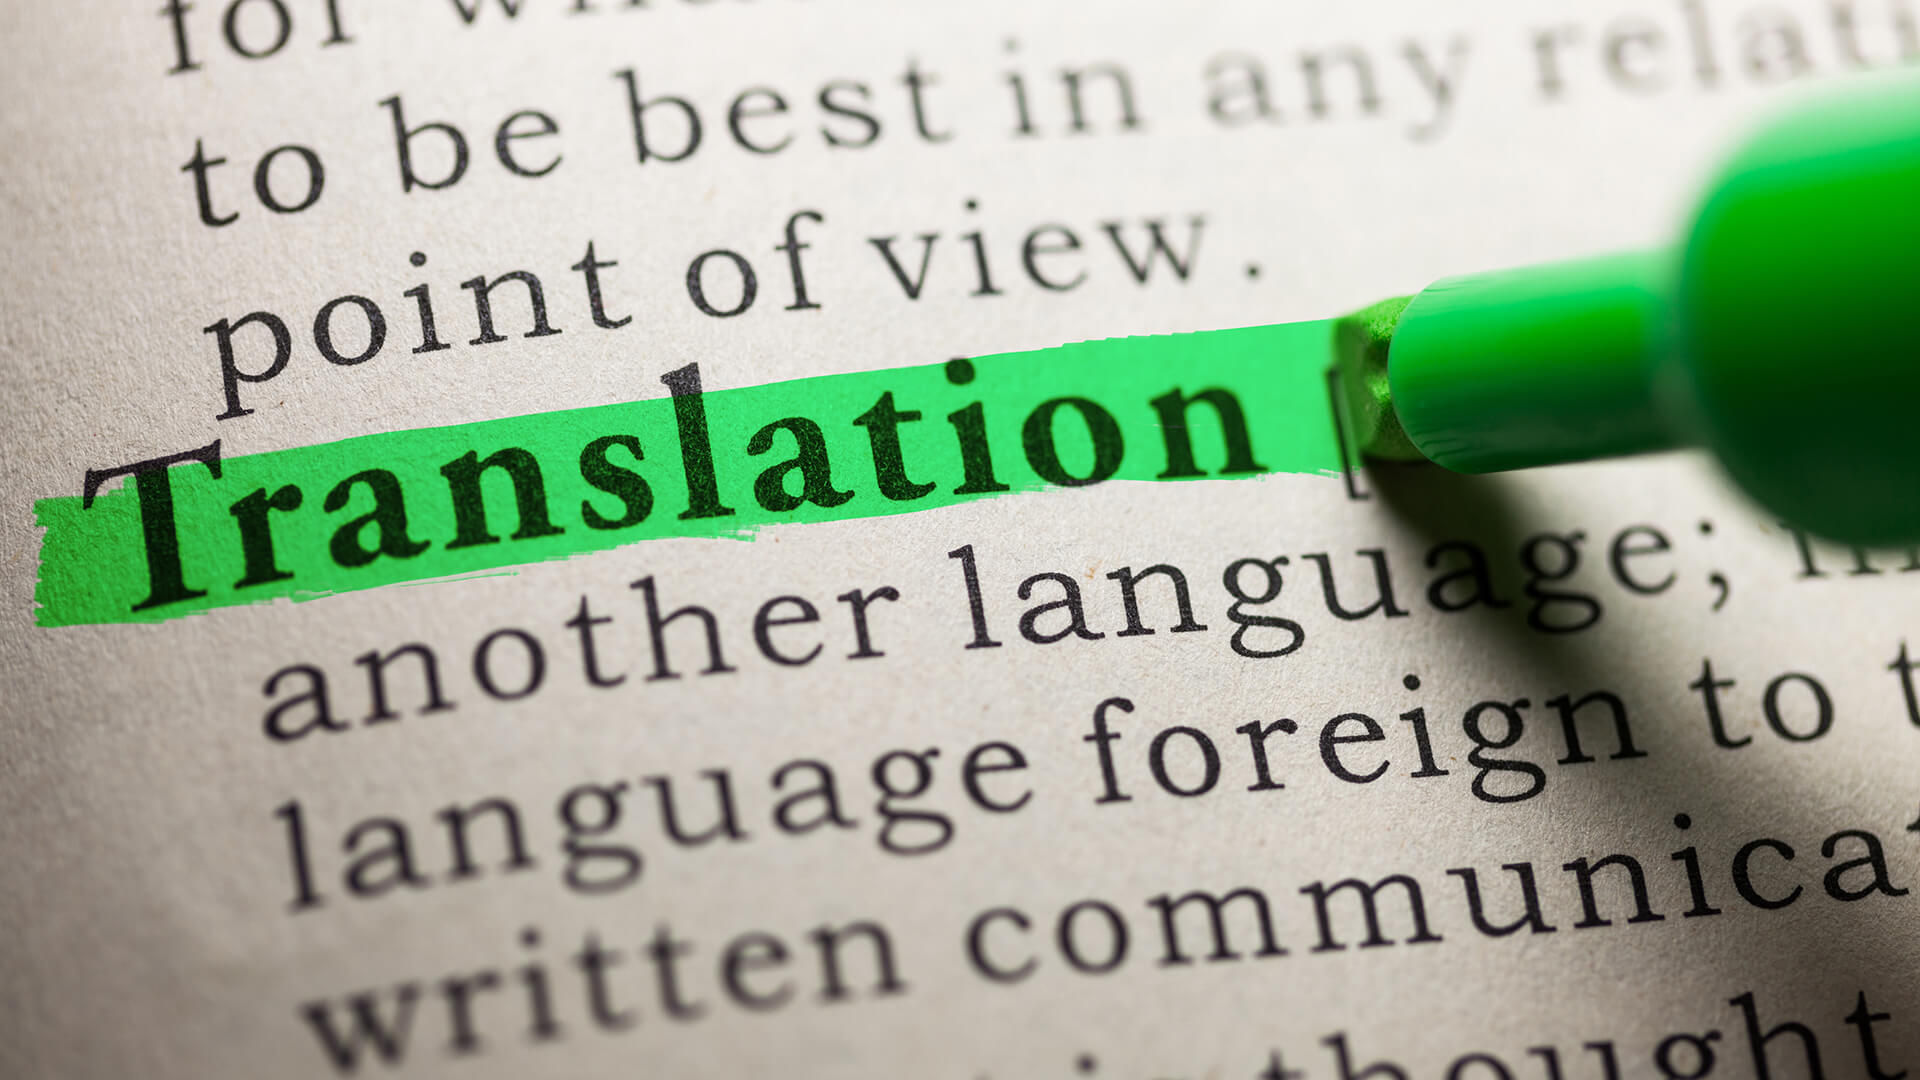 7526I can help in translating your work/documents